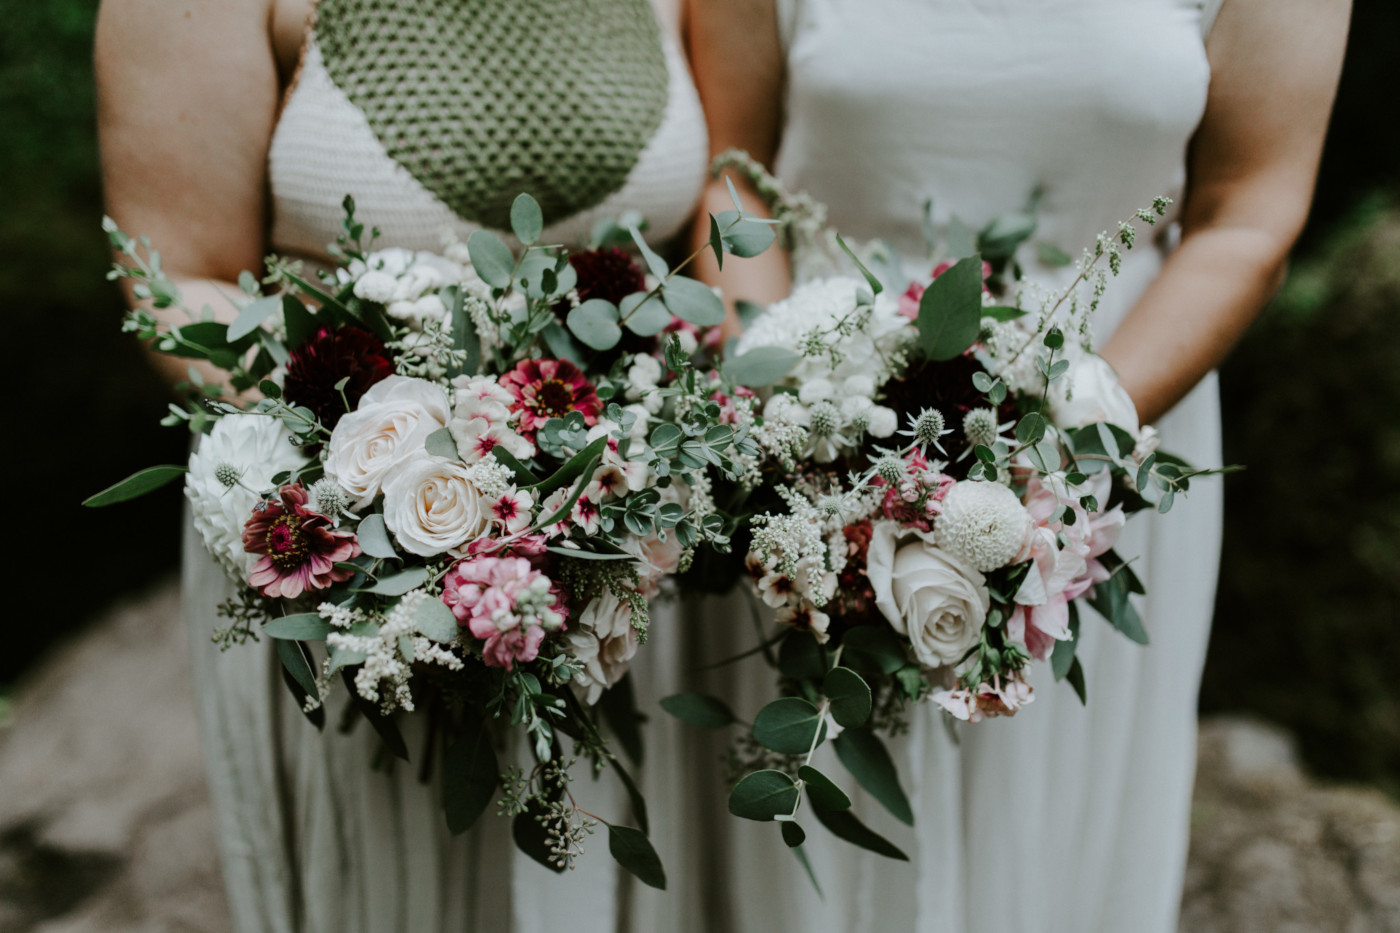 Audrey and Kate's bouquets. Elopement wedding photography at Bridal Veil Falls by Sienna Plus Josh.